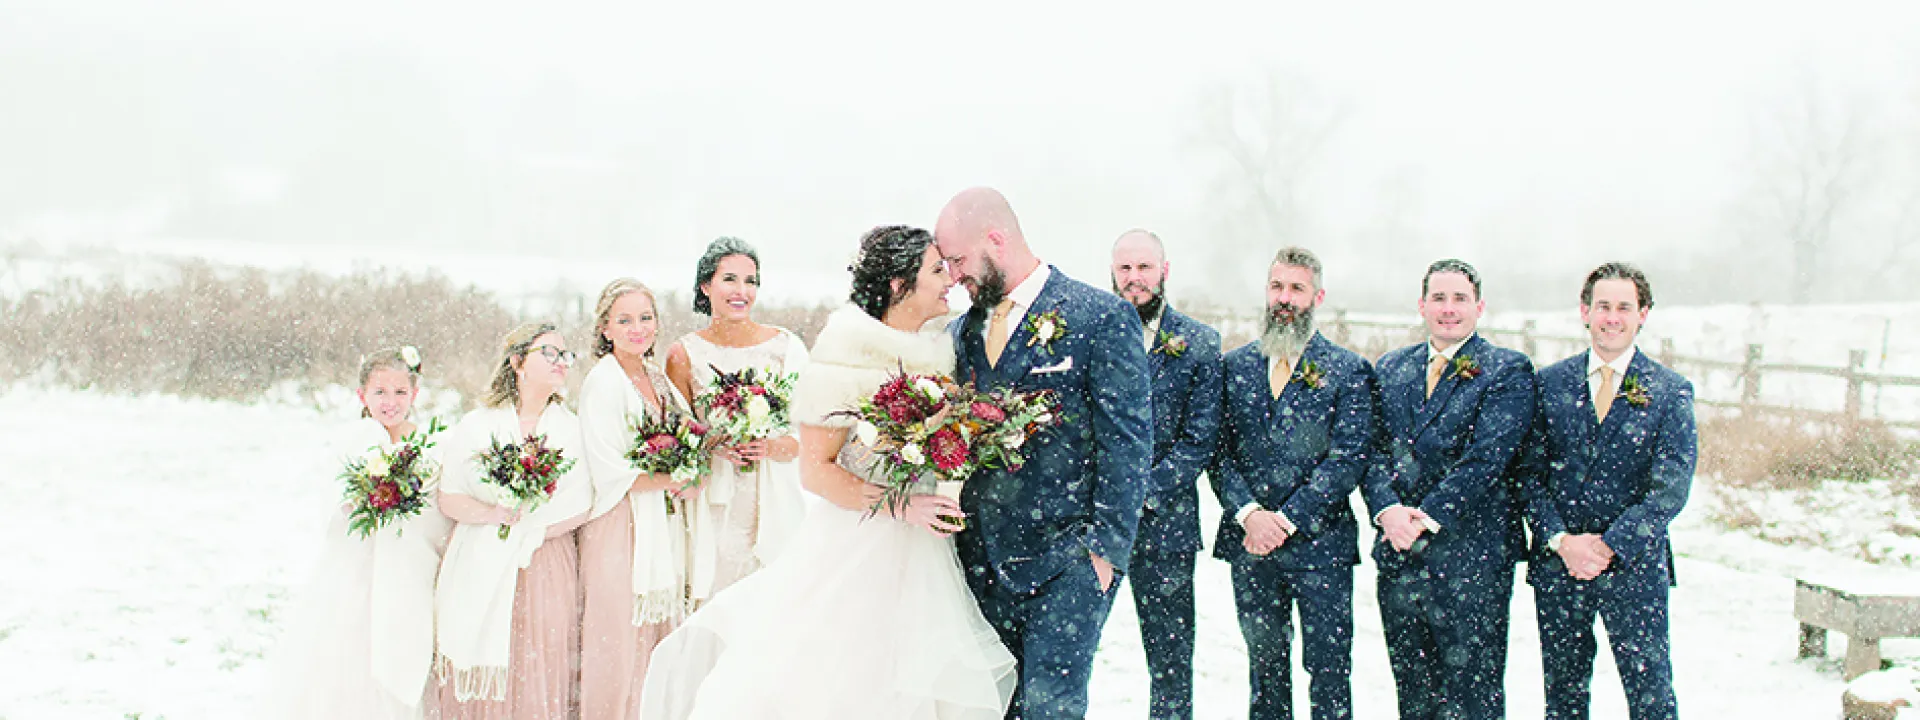 Maggie Christie and Jeremy Kocher kiss in front of their wedding party at The Enchanted Barn.